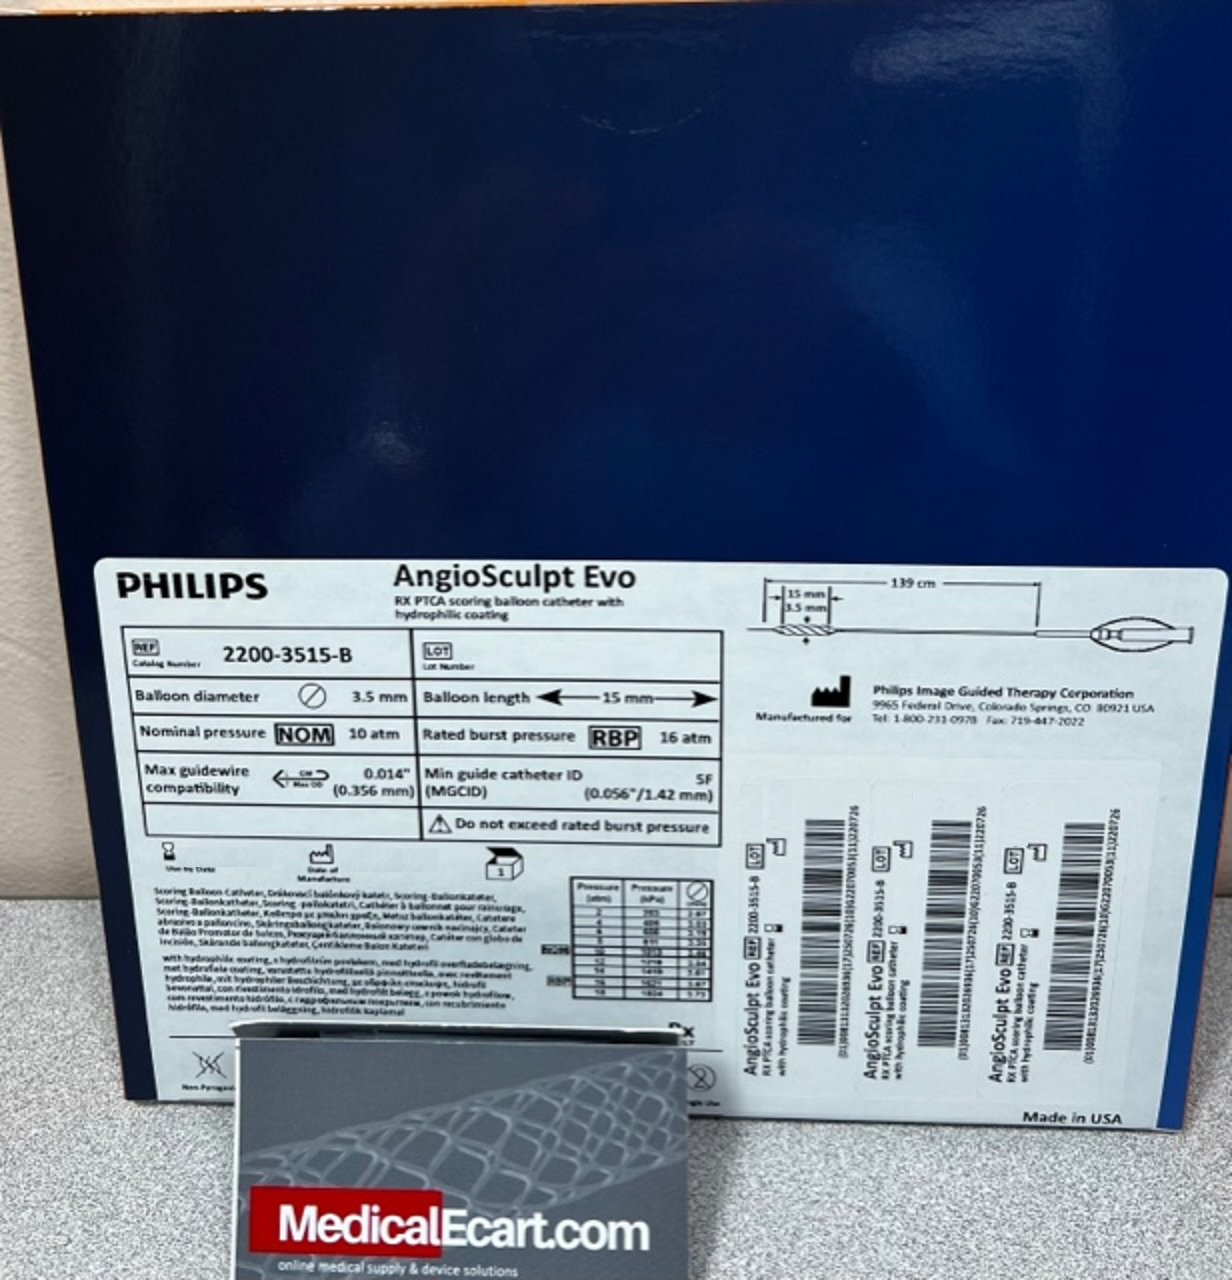 https://cdn10.bigcommerce.com/s-x81fqsb/products/9038/images/12551/Philips_2200-3515-B_AngioSculpt_Evo_RX_PTA_scoring_Balloon_Catheter__50690.1664838329.1280.1280.png?c=2